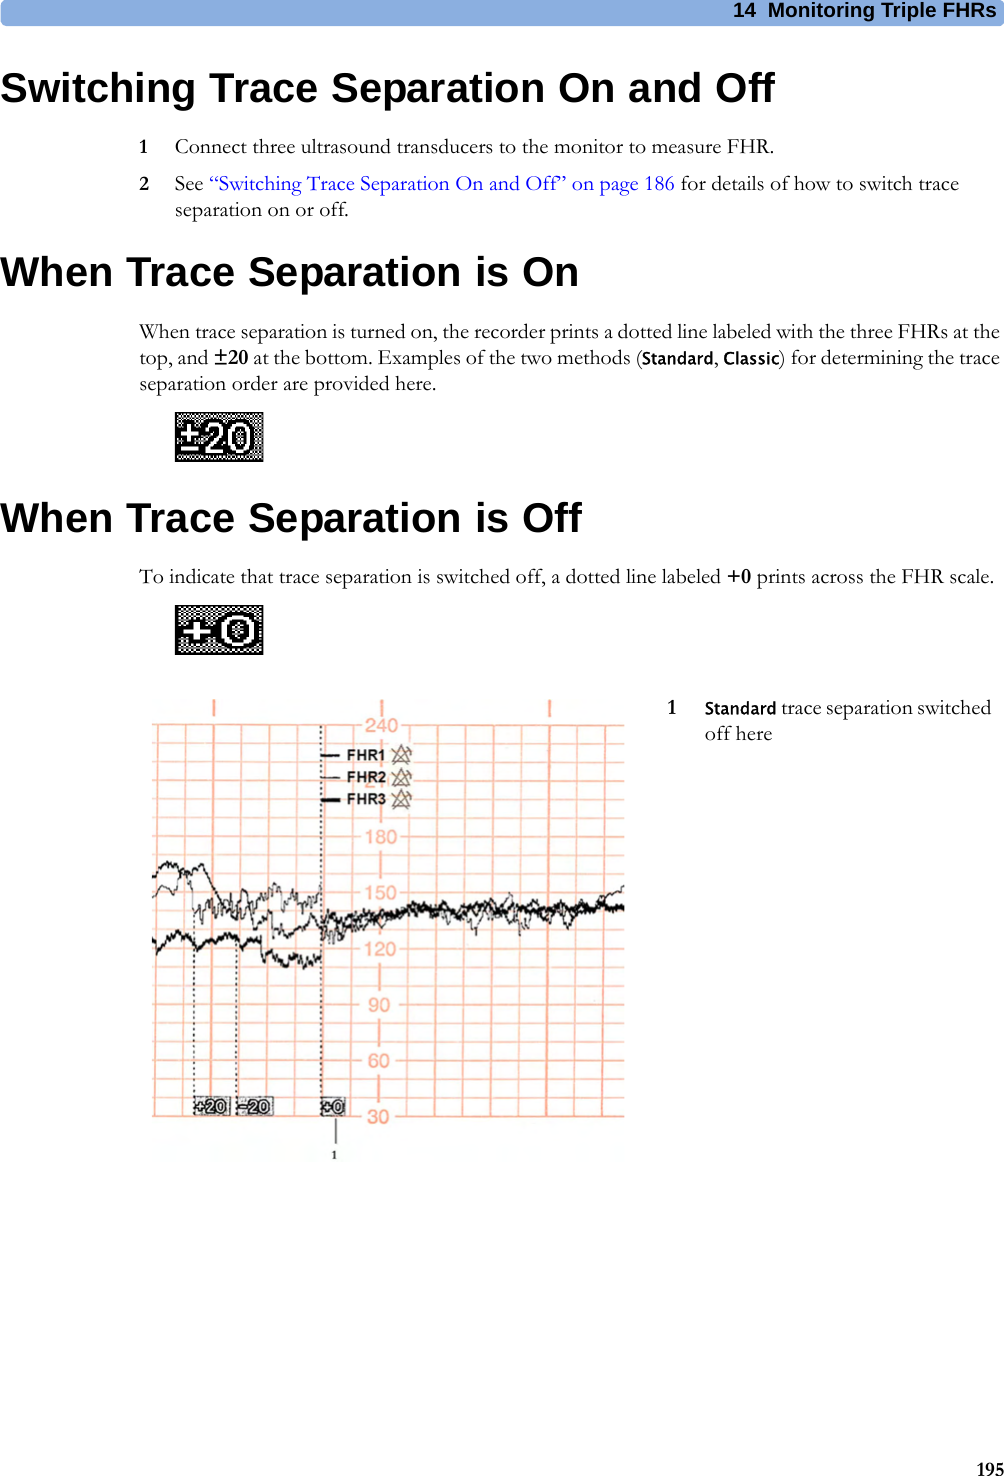 14  Monitoring Triple FHRs195Switching Trace Separation On and Off1Connect three ultrasound transducers to the monitor to measure FHR.2See “Switching Trace Separation On and Off” on page 186 for details of how to switch trace separation on or off.When Trace Separation is OnWhen trace separation is turned on, the recorder prints a dotted line labeled with the three FHRs at the top, and ±20 at the bottom. Examples of the two methods (Standard, Classic) for determining the trace separation order are provided here.When Trace Separation is OffTo indicate that trace separation is switched off, a dotted line labeled +0 prints across the FHR scale.1Standard trace separation switched off here